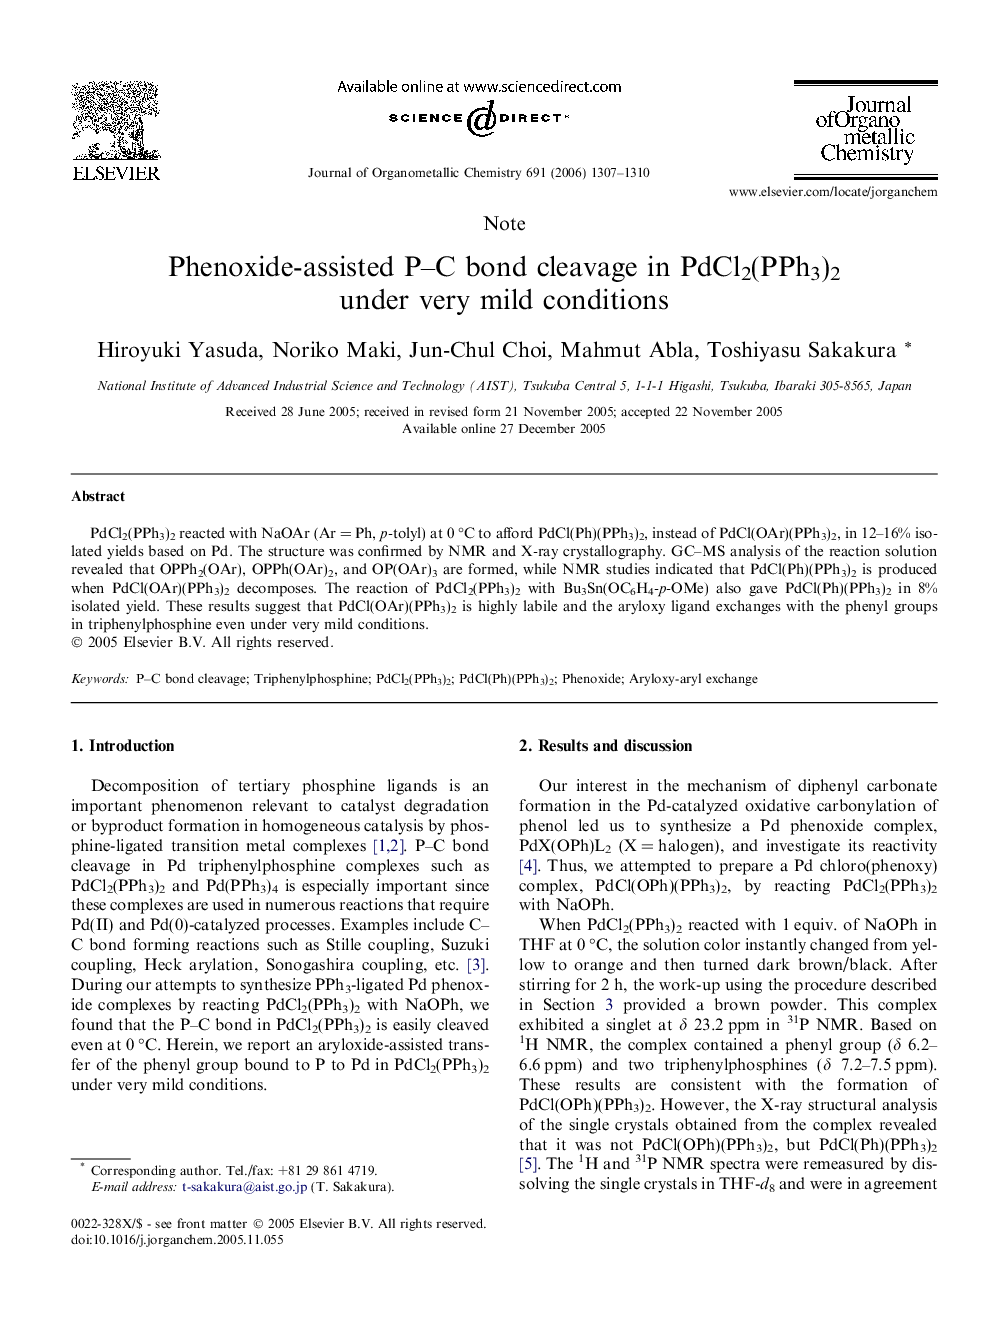 Phenoxide-assisted P–C bond cleavage in PdCl2(PPh3)2 under very mild conditions